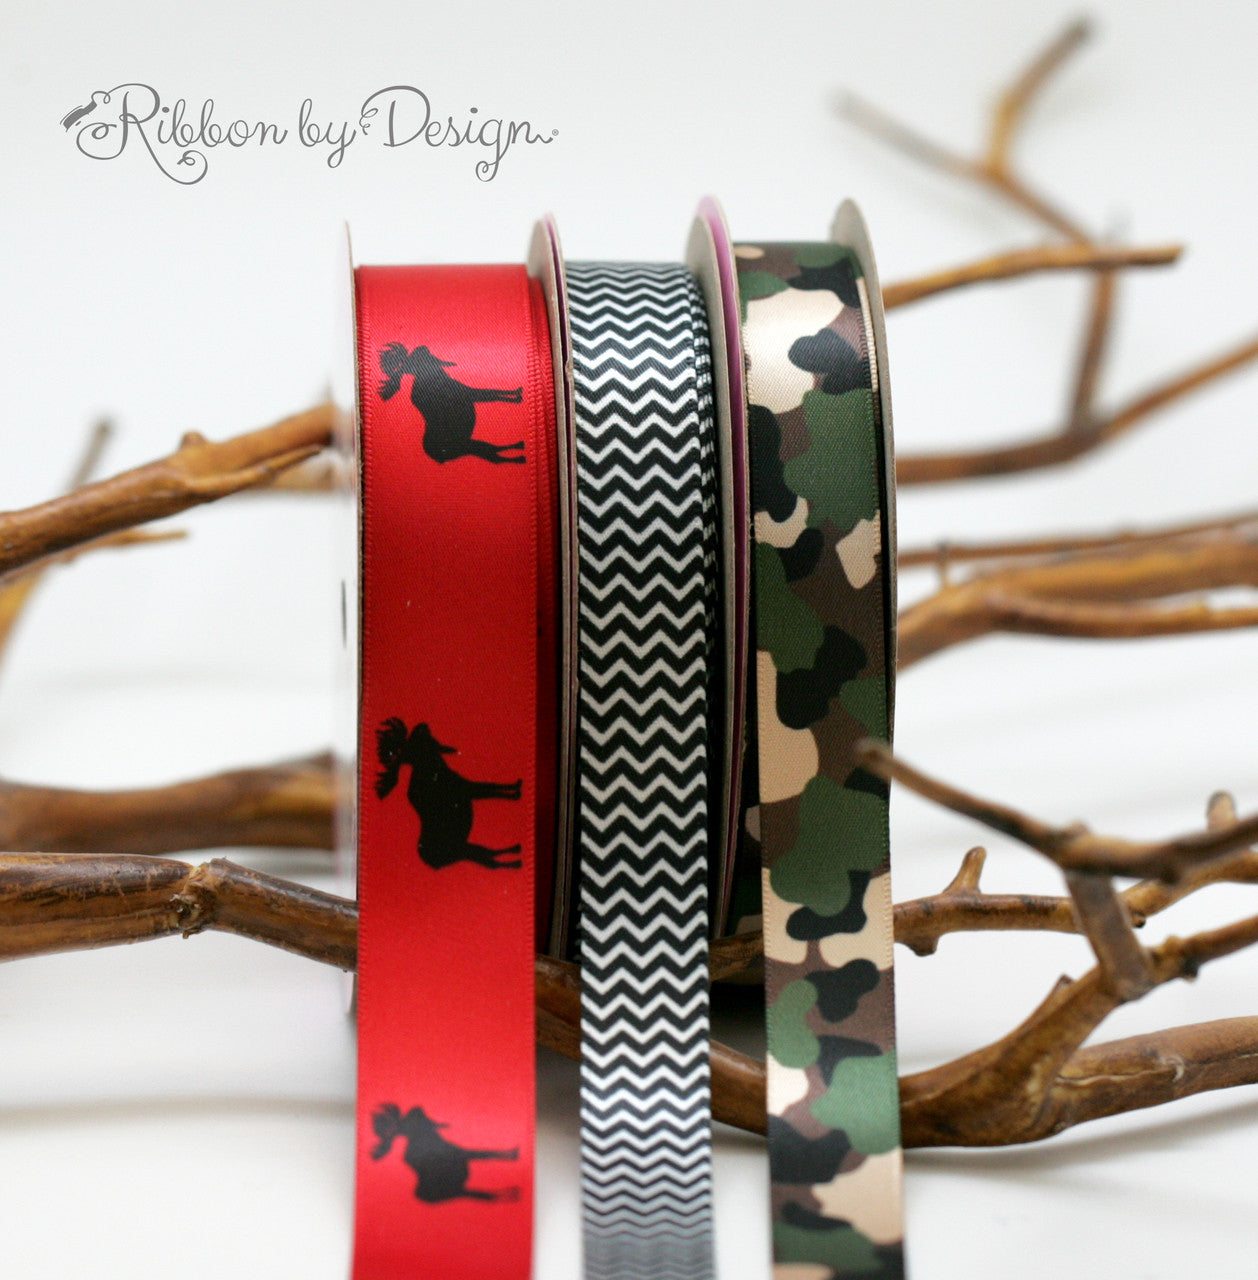 Set in combination with our camouflage and black and white chevon, our Moose adds all the fun!